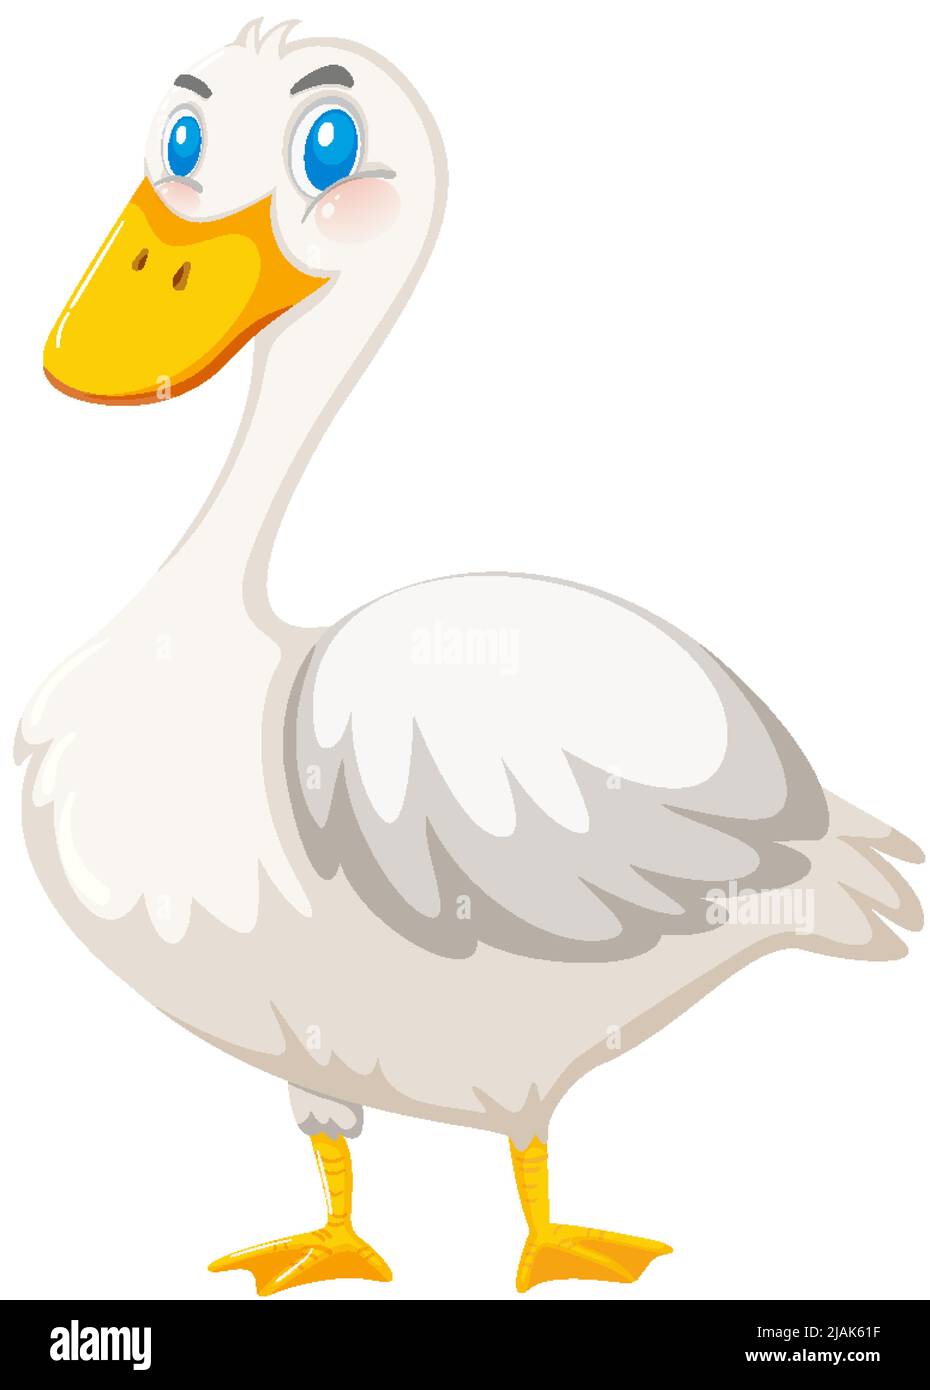 Duck cartoon character on white background illustration Stock Vector ...